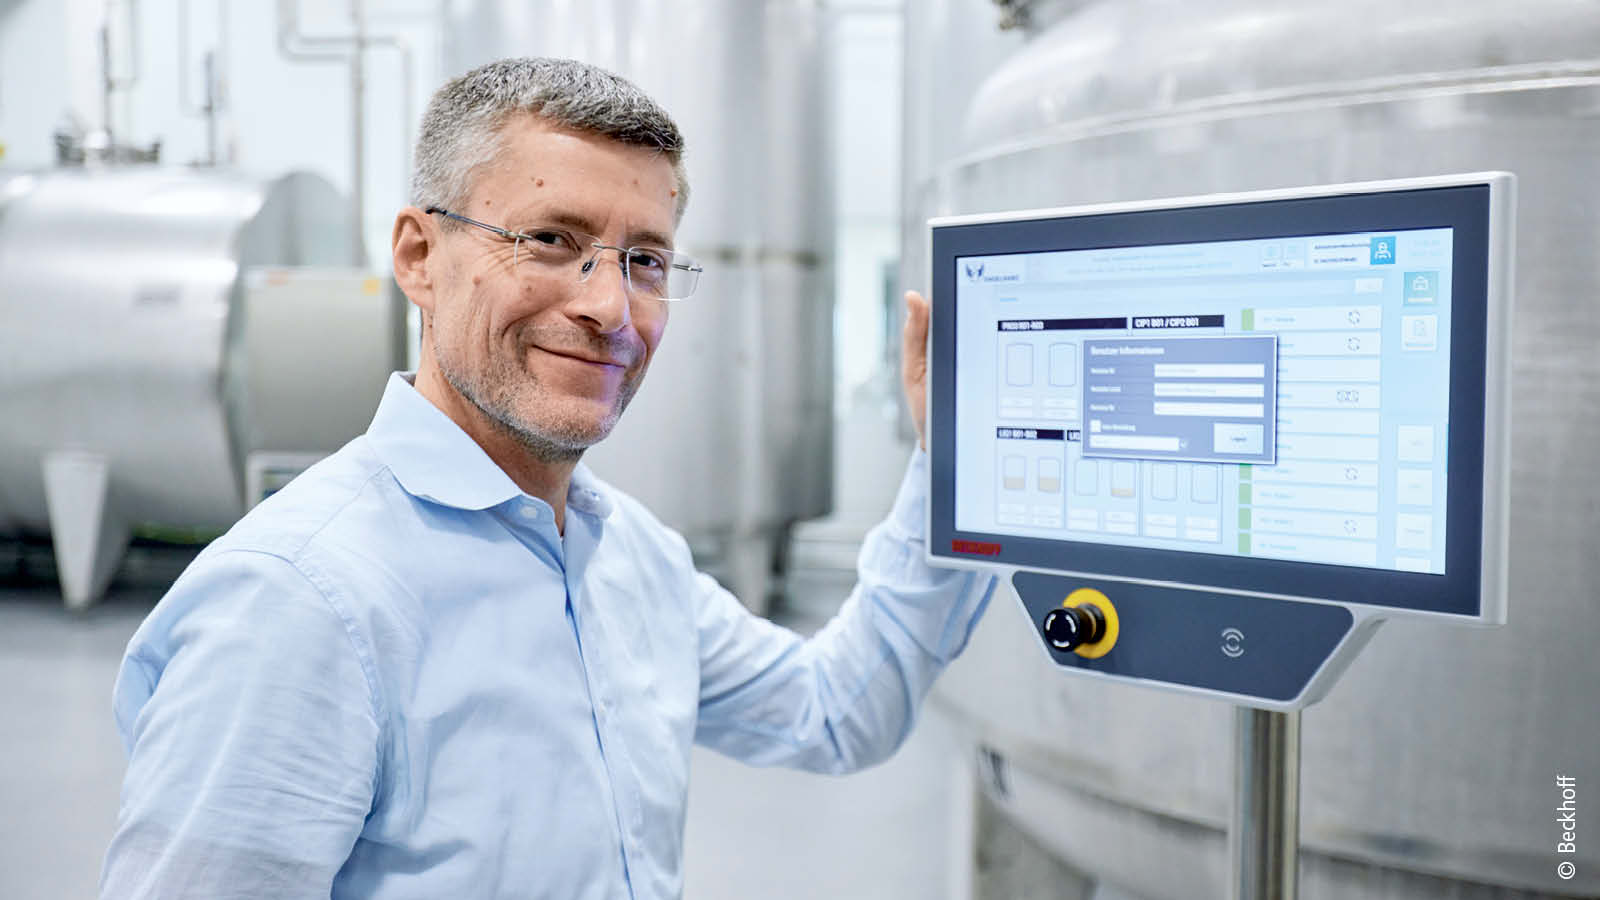 “Even during the initial process of planning the new production plant for our liquids, I loved the flexibility that PC-based control, TwinCAT 3 and Beckhoff Systems Engineering brought,” says Rüdiger John, Head of Engineering at Engelhard Arzneimittel. 